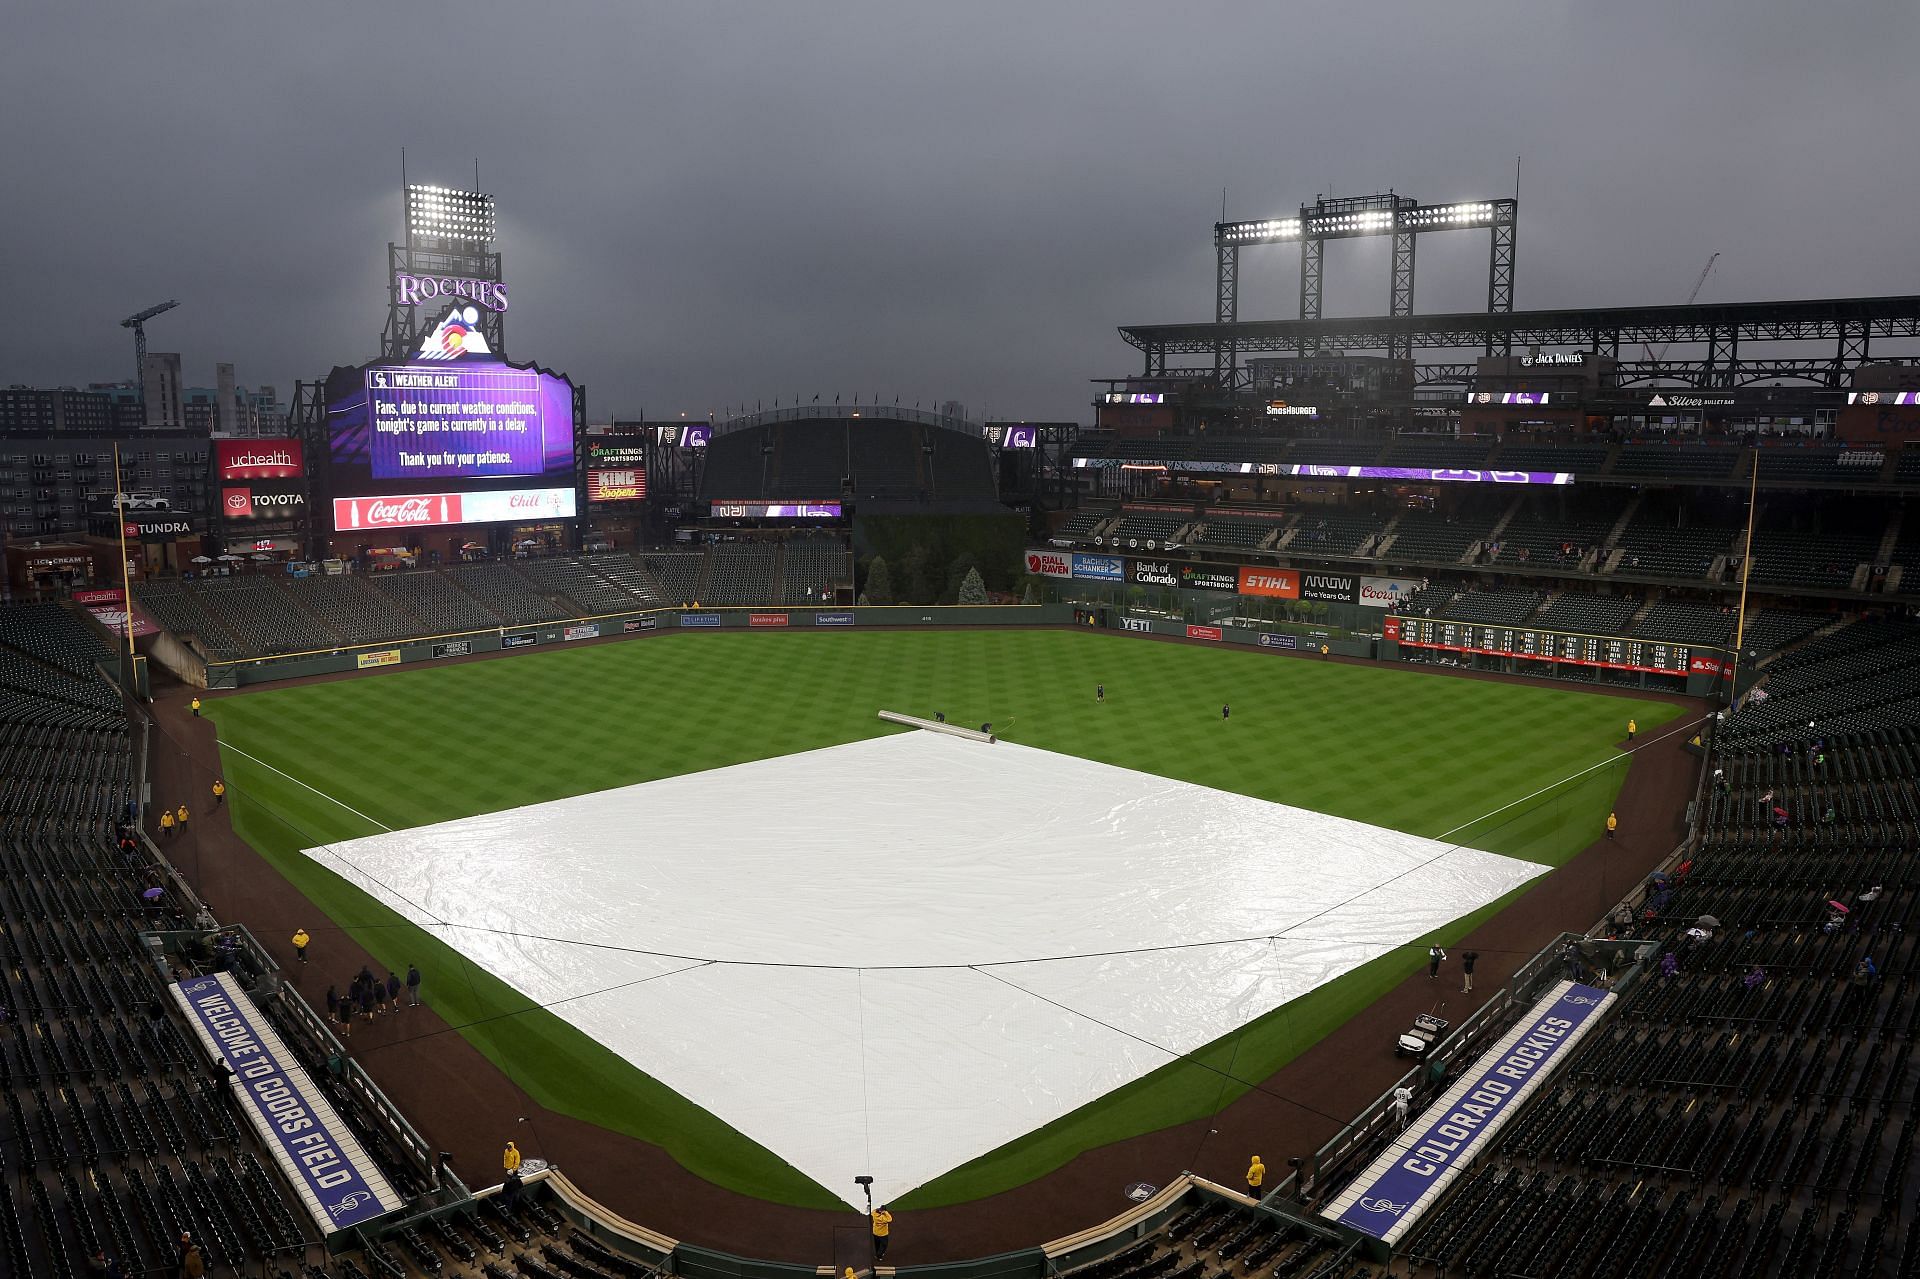 largest outfield mlb stadium: Which MLB stadium has the largest